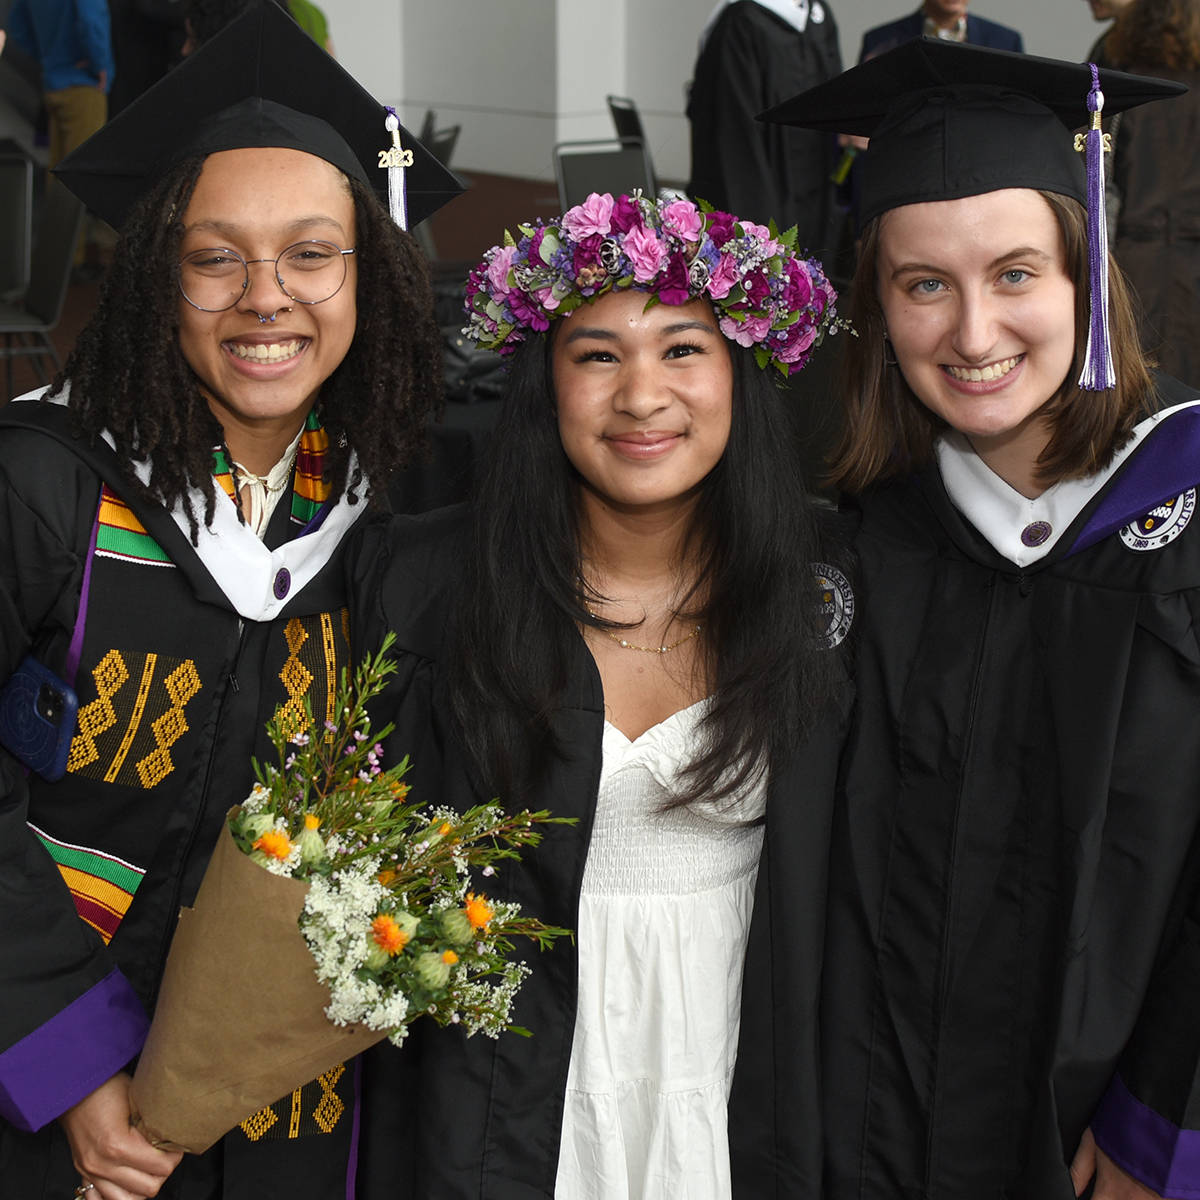 Three graduating students in robes, two in traditional caps and one wearing a beautiful flower crown, pose for a photo